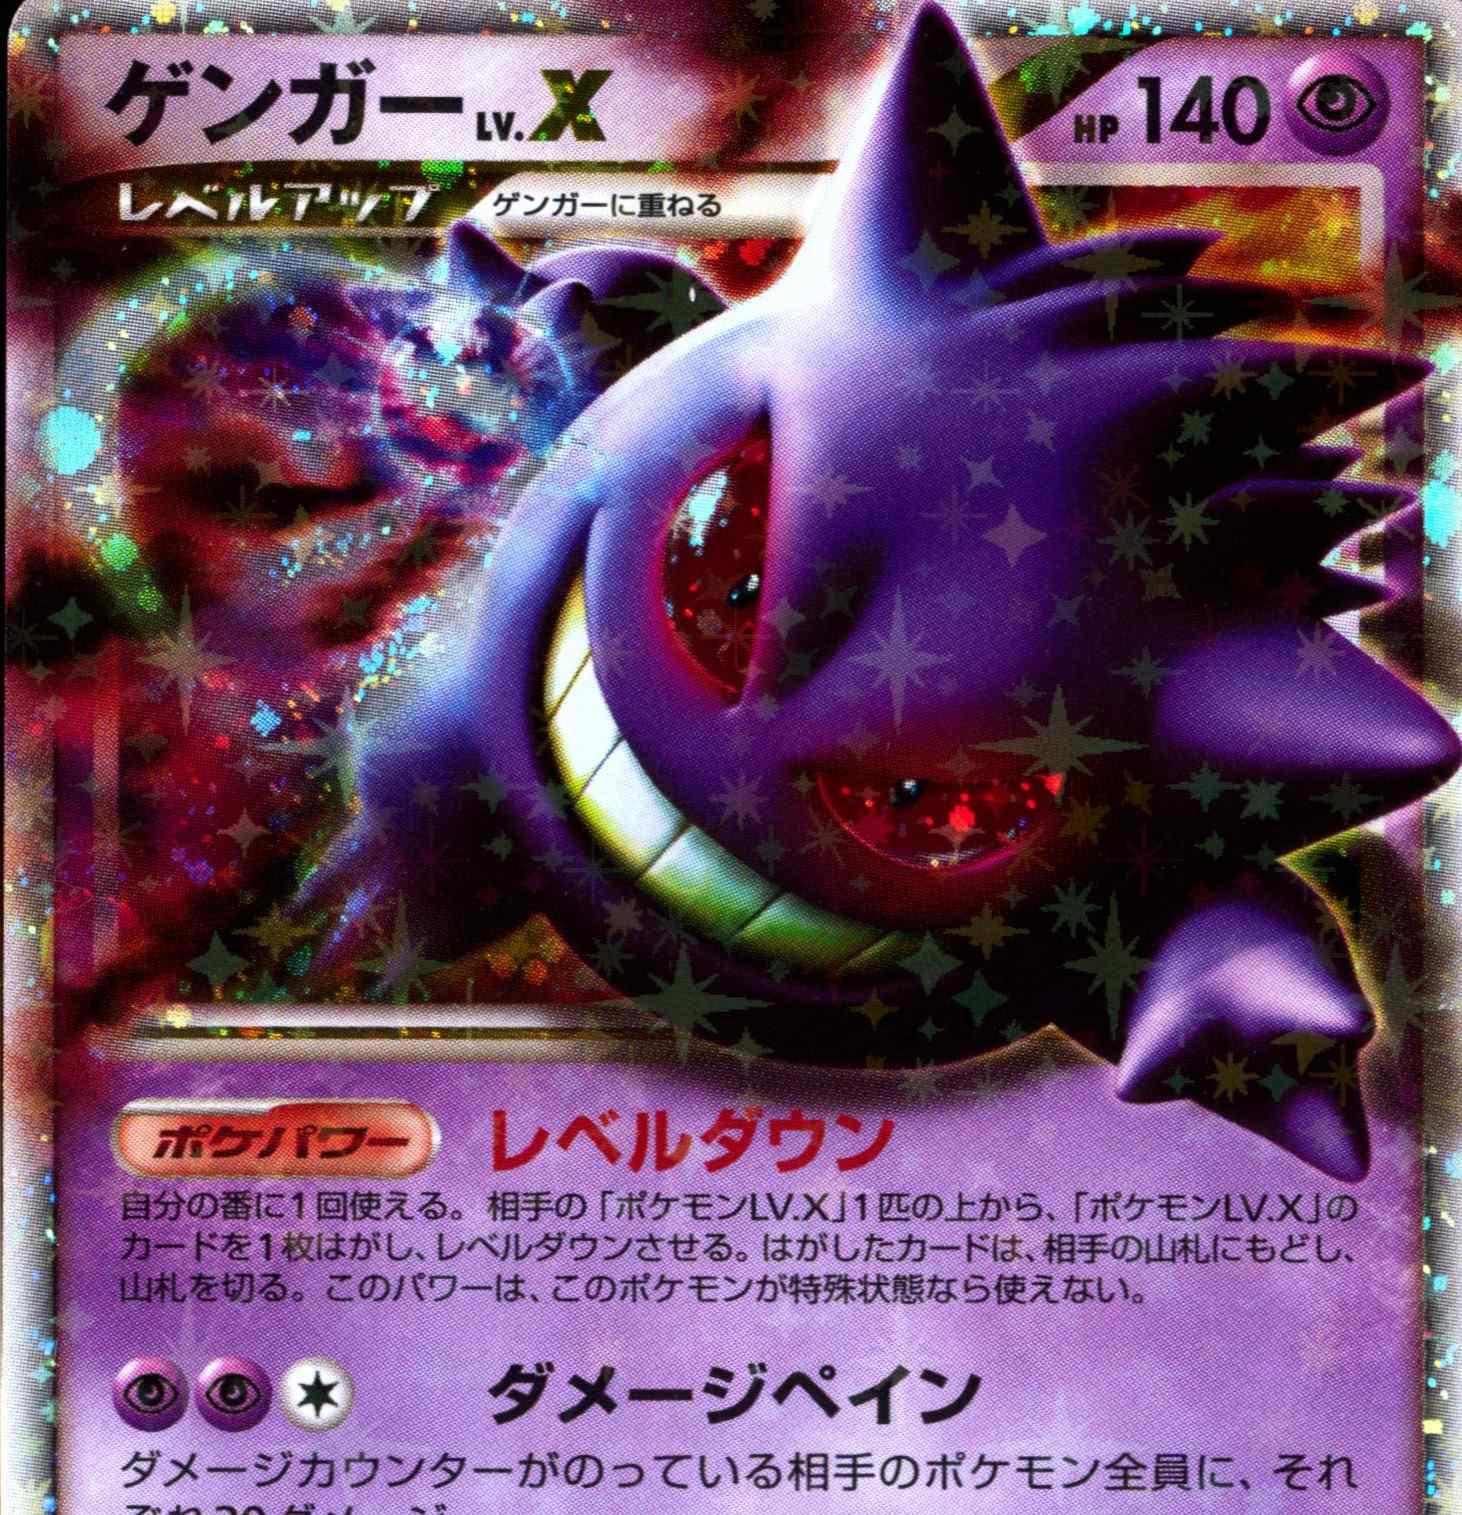 Auction Item 262778872261 TCG Cards 2009 Pokemon Japanese Mewtwo LV.X  Collection Pack